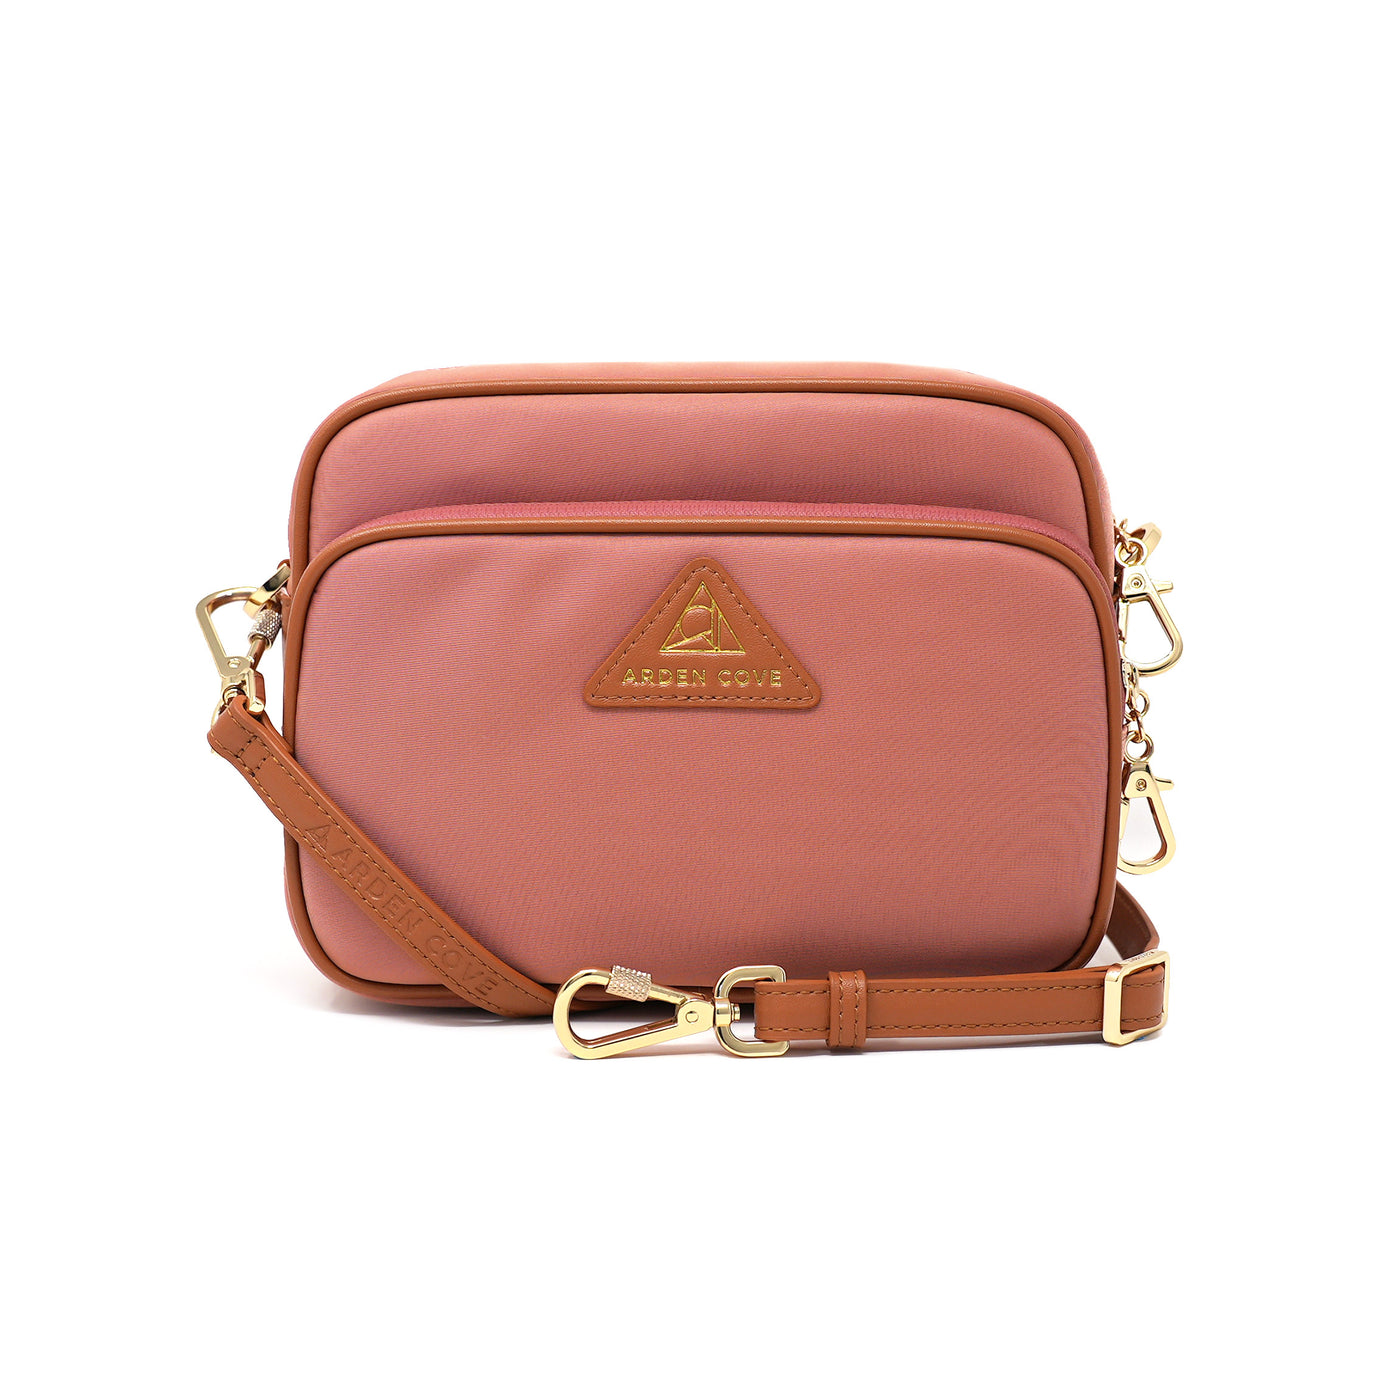 Anti-theft Water-resistant Travel Crossbody - Crissy Full Crossbody in Dusty Pink Gold with slash-resistant faux leather locking clasps straps - front view - Arden Cove